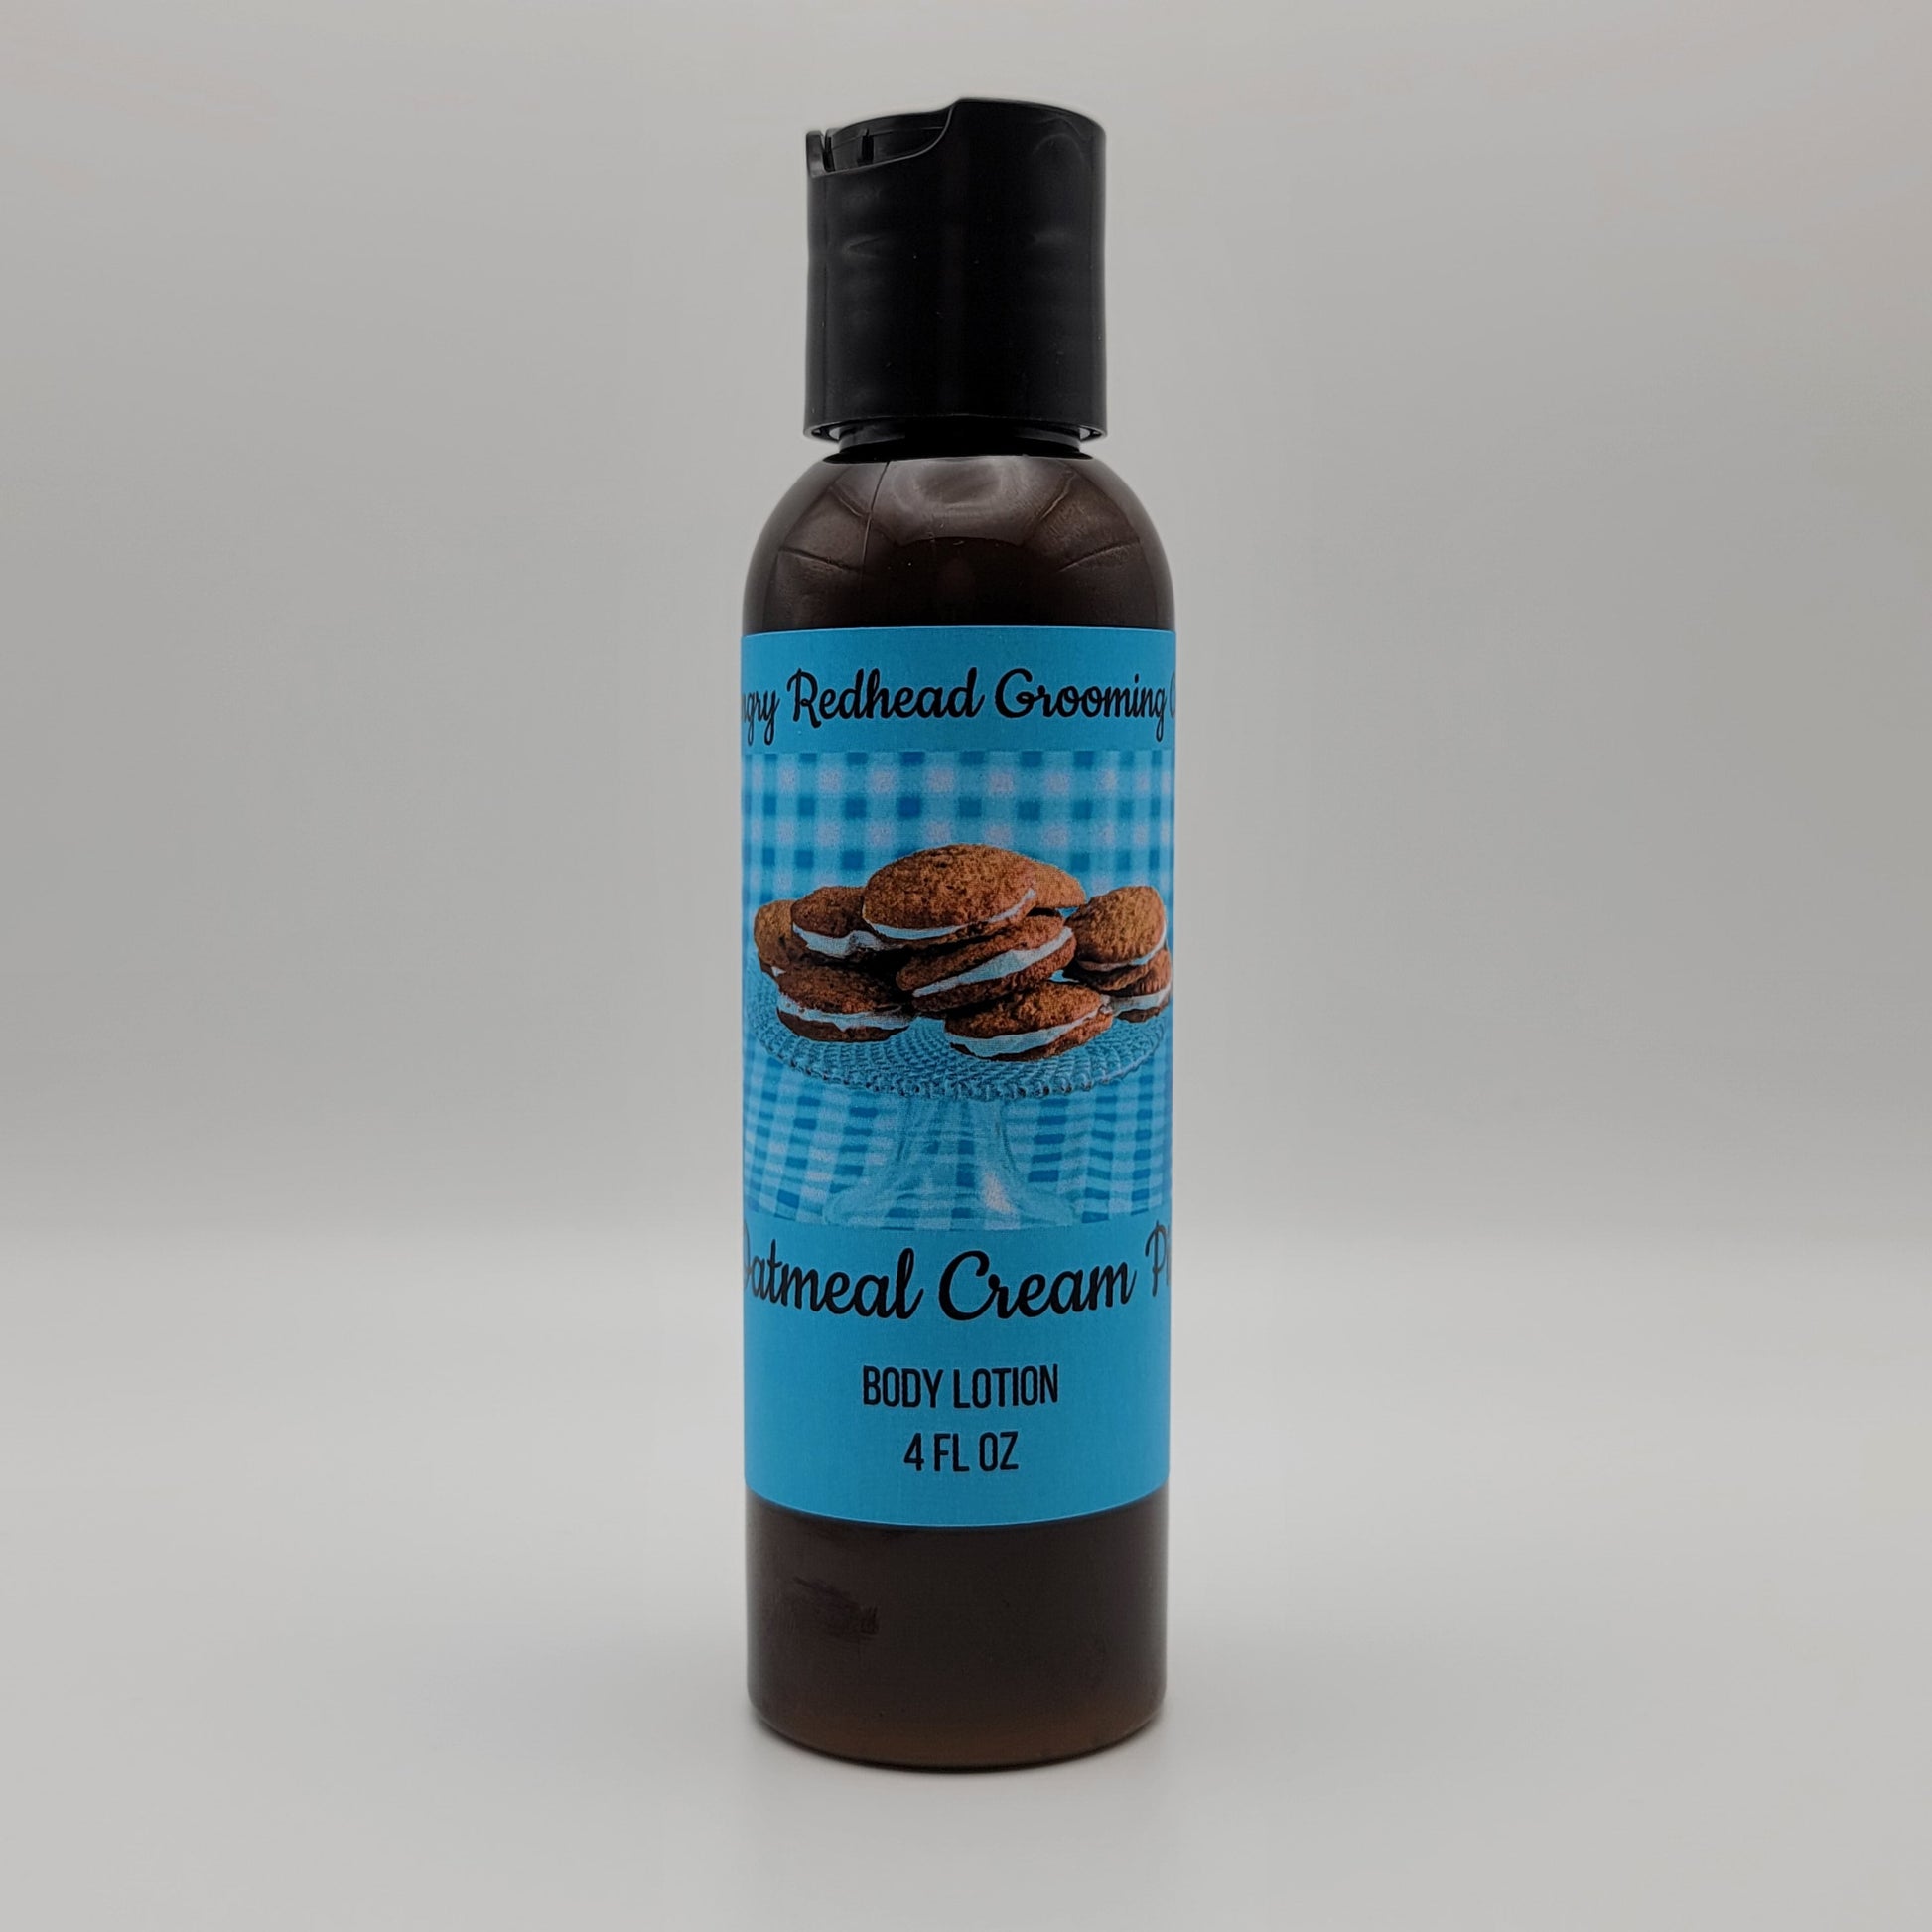 Oatmeal Cream Pie Body Lotion by Angry Redhead Grooming Co - angryredheadgrooming.com